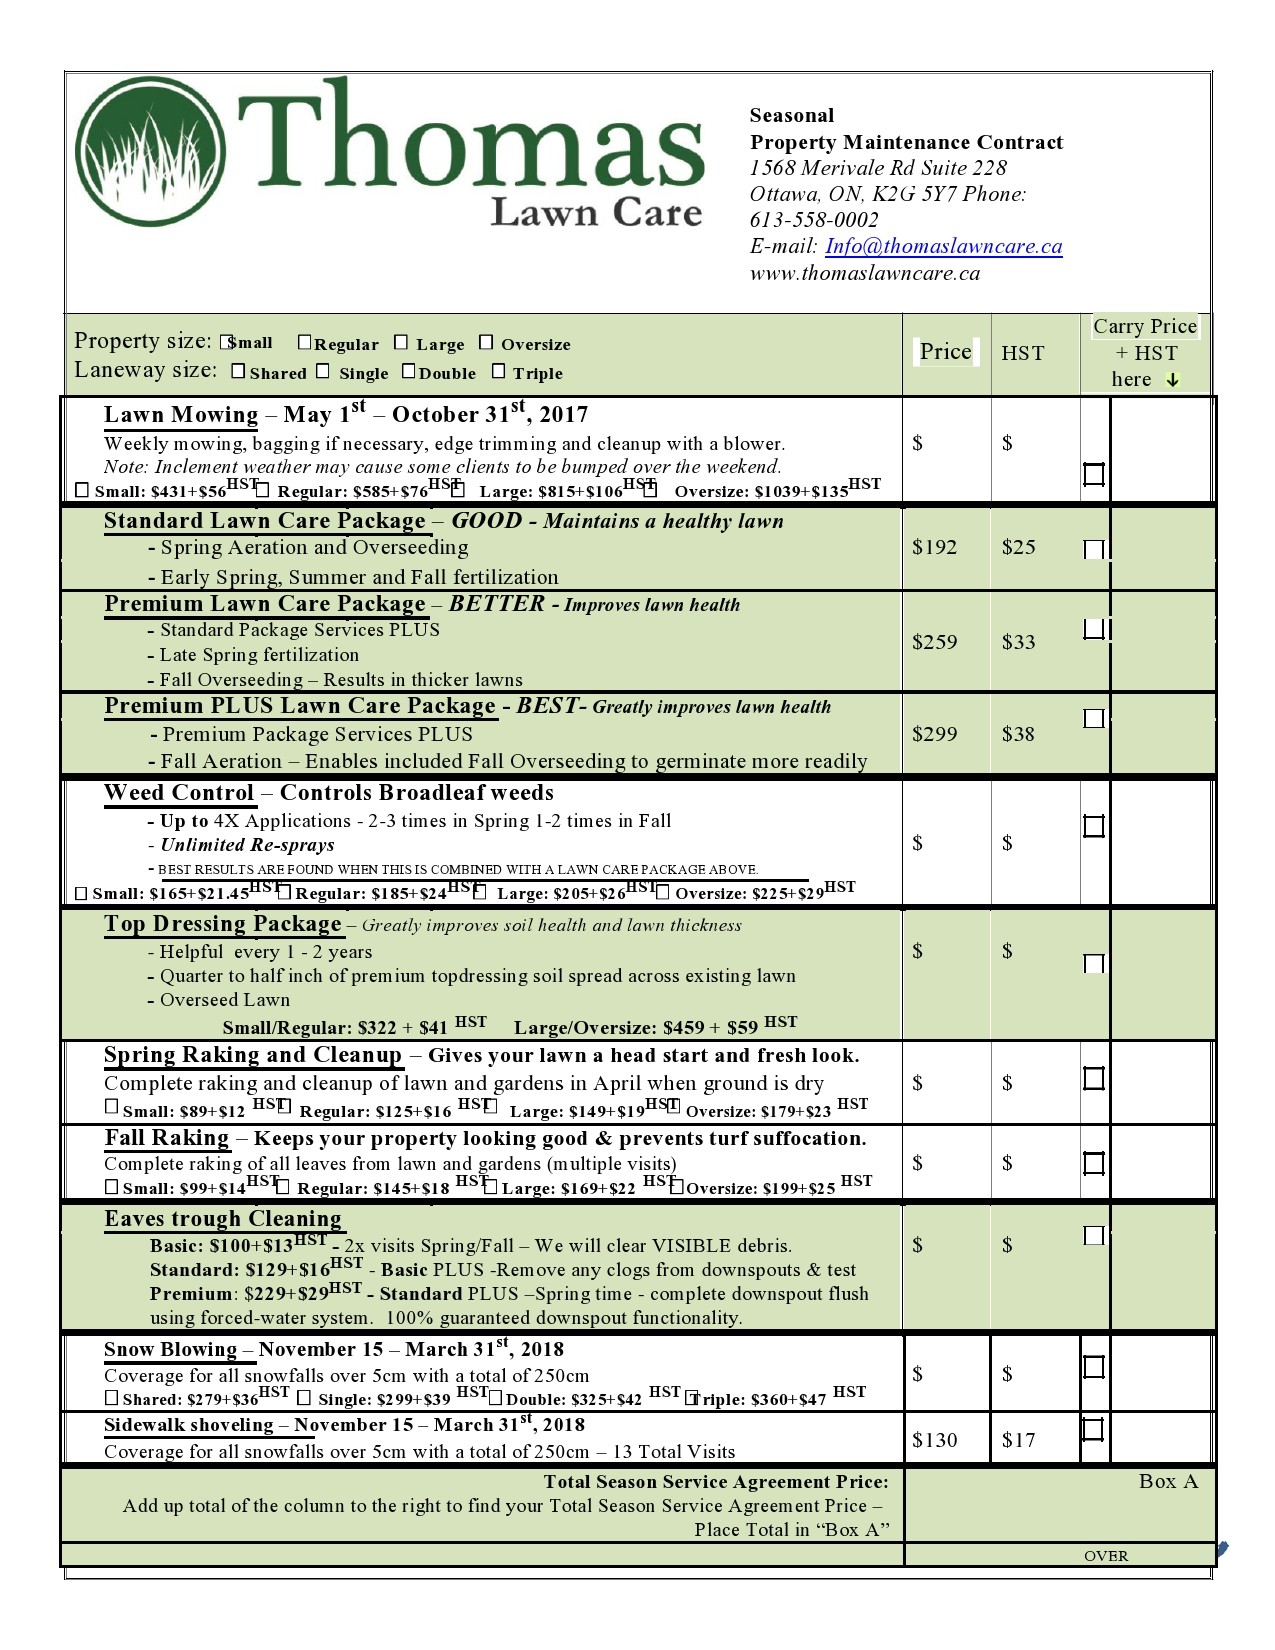 Free lawn care contract template 27